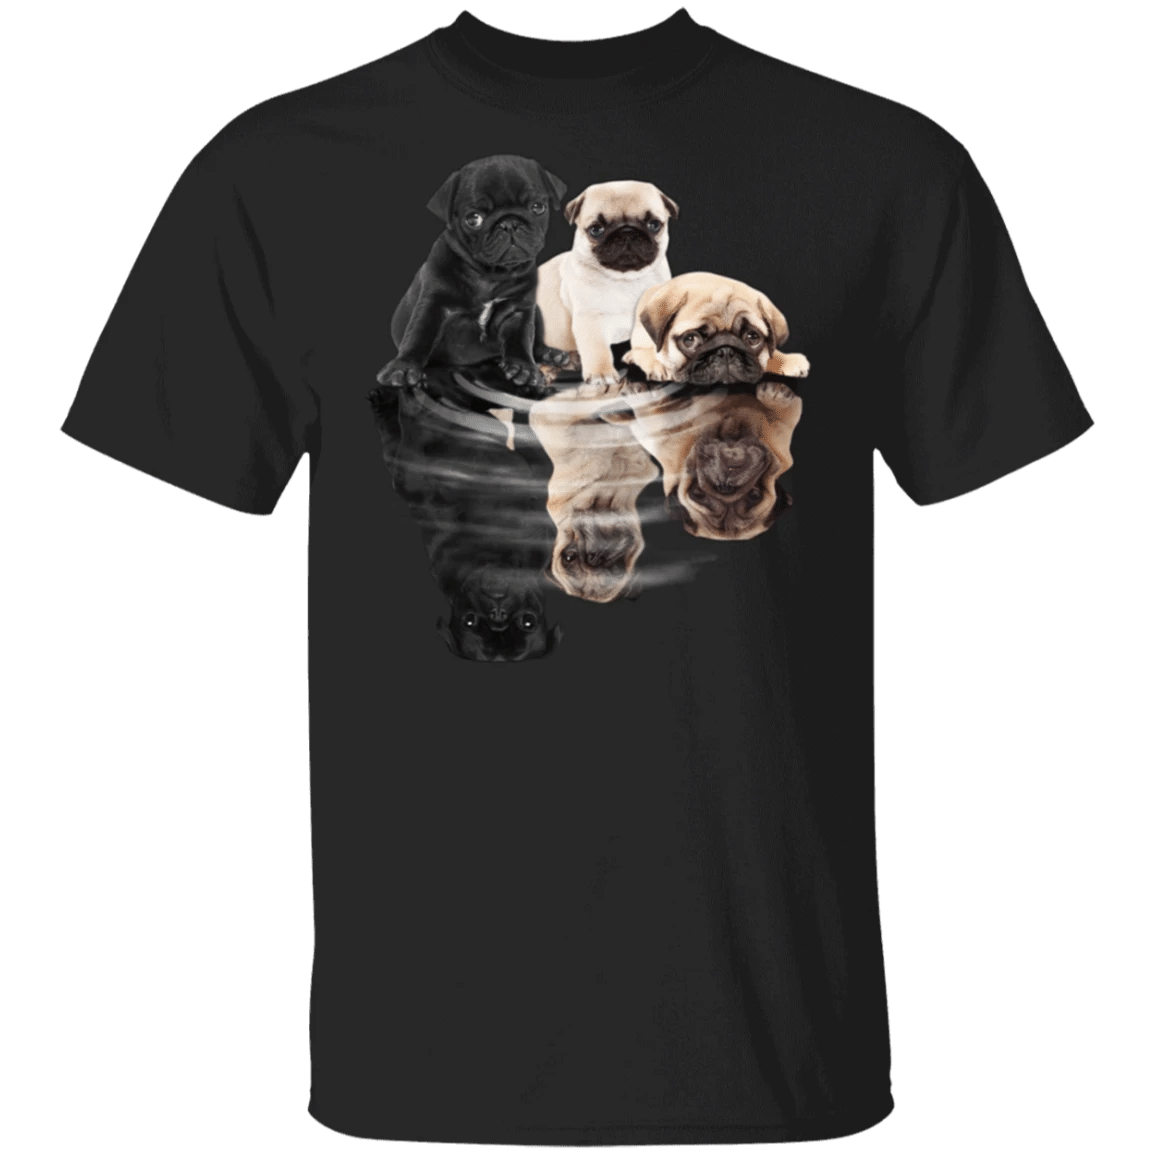 Pug Dogs T-Shirt Gifts For Dog Owners Cute Shirts For Women Present For Friend